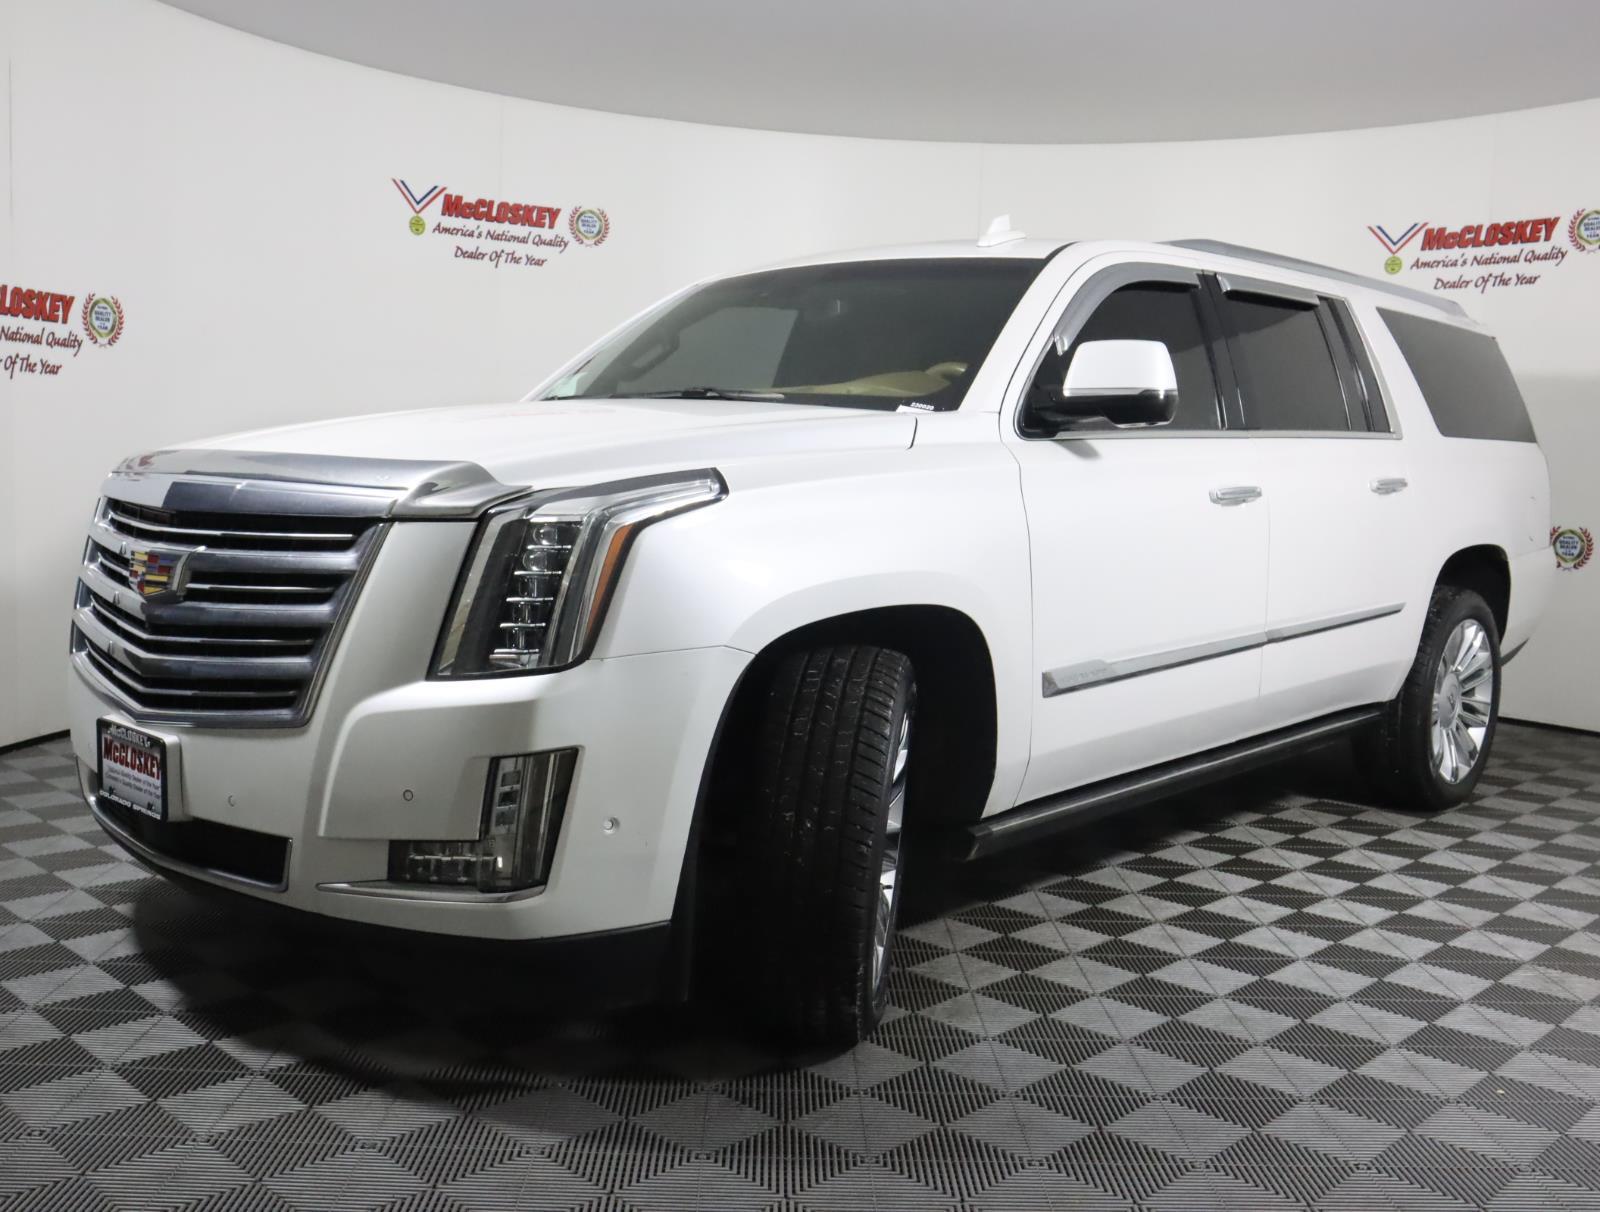 Preowned 2017 CADILLAC Escalade ESV Platinum ONE OWNER! for sale by McCloskey Imports & 4X4's in Colorado Springs, CO